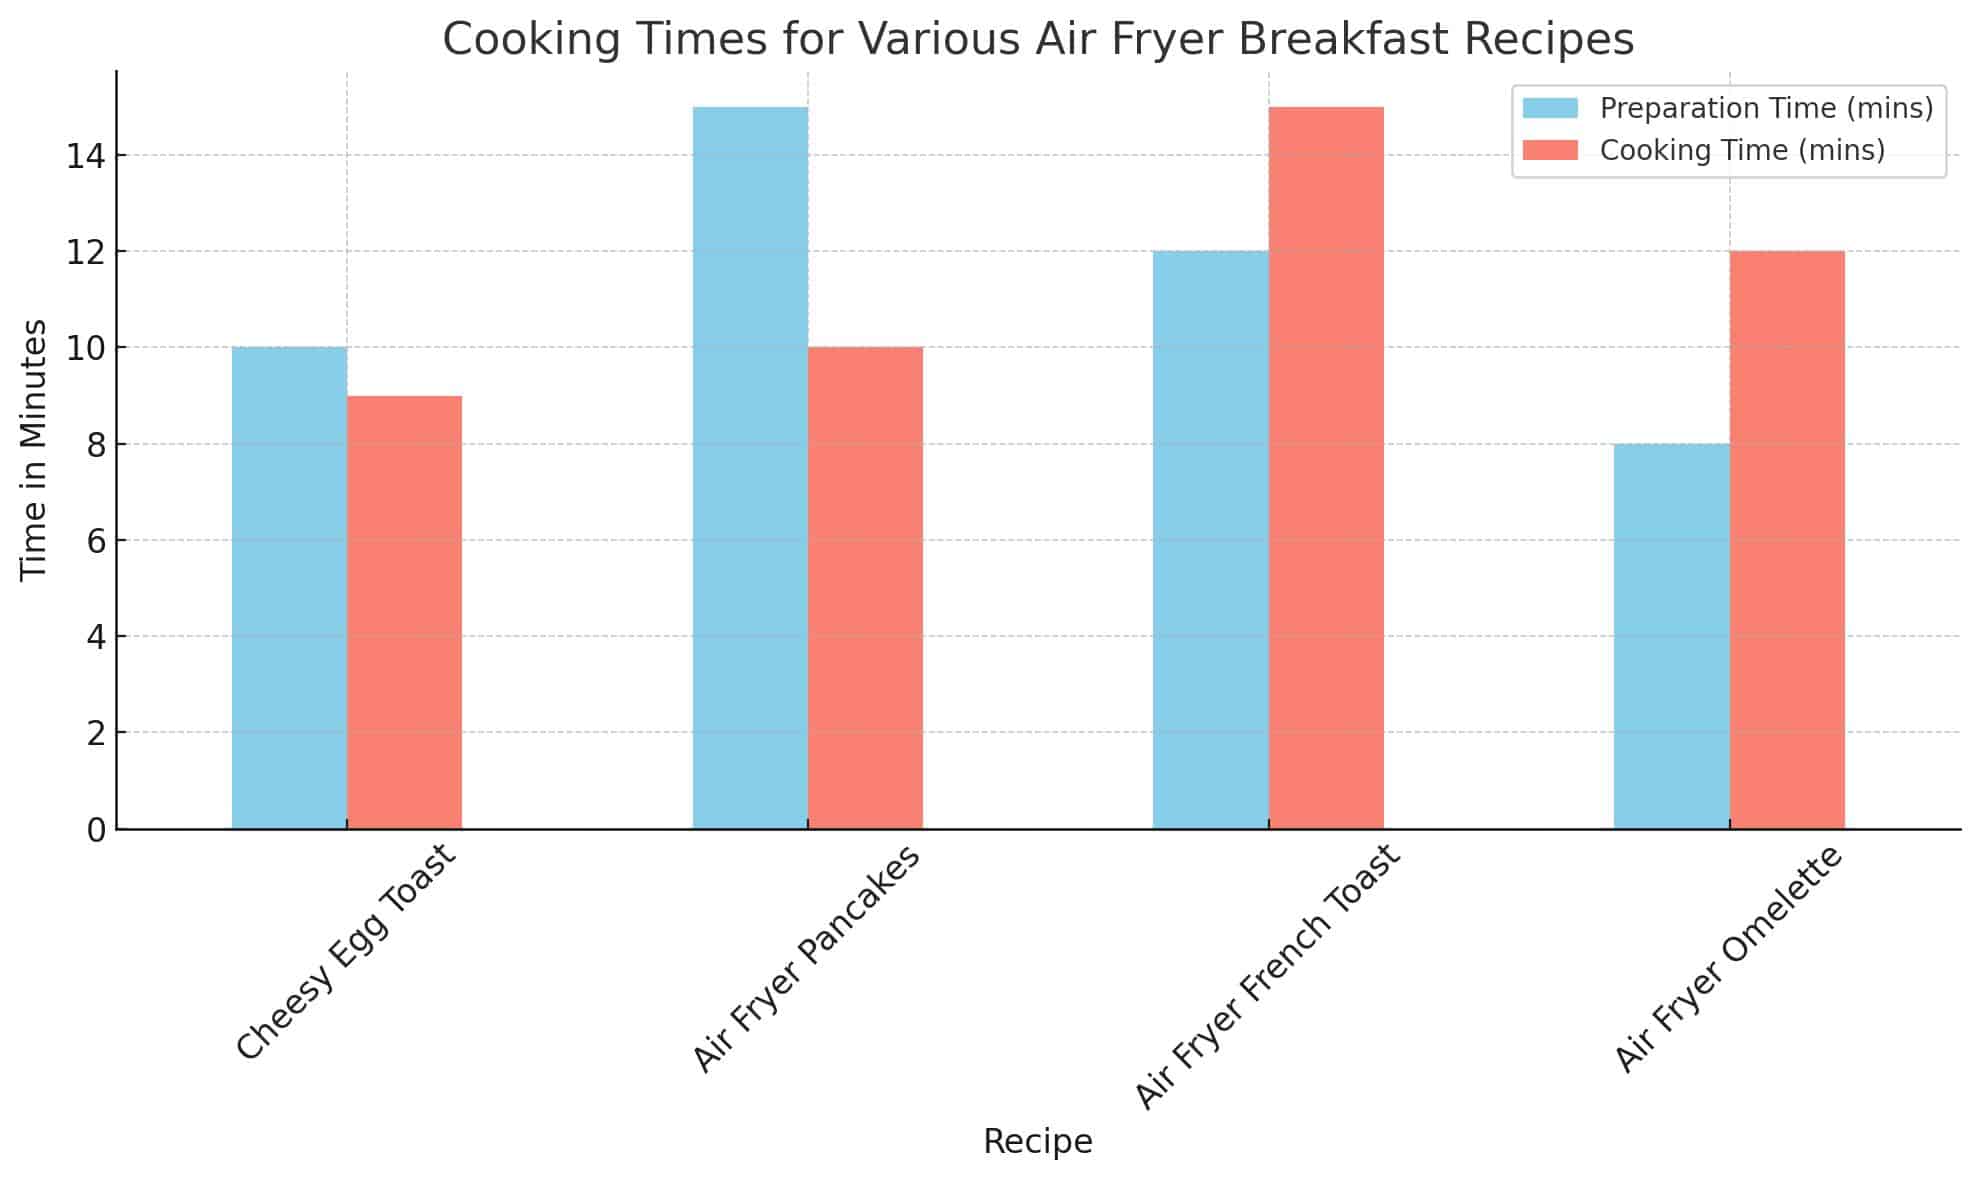 Cooking and prep times of various air fryer breakfast recipes